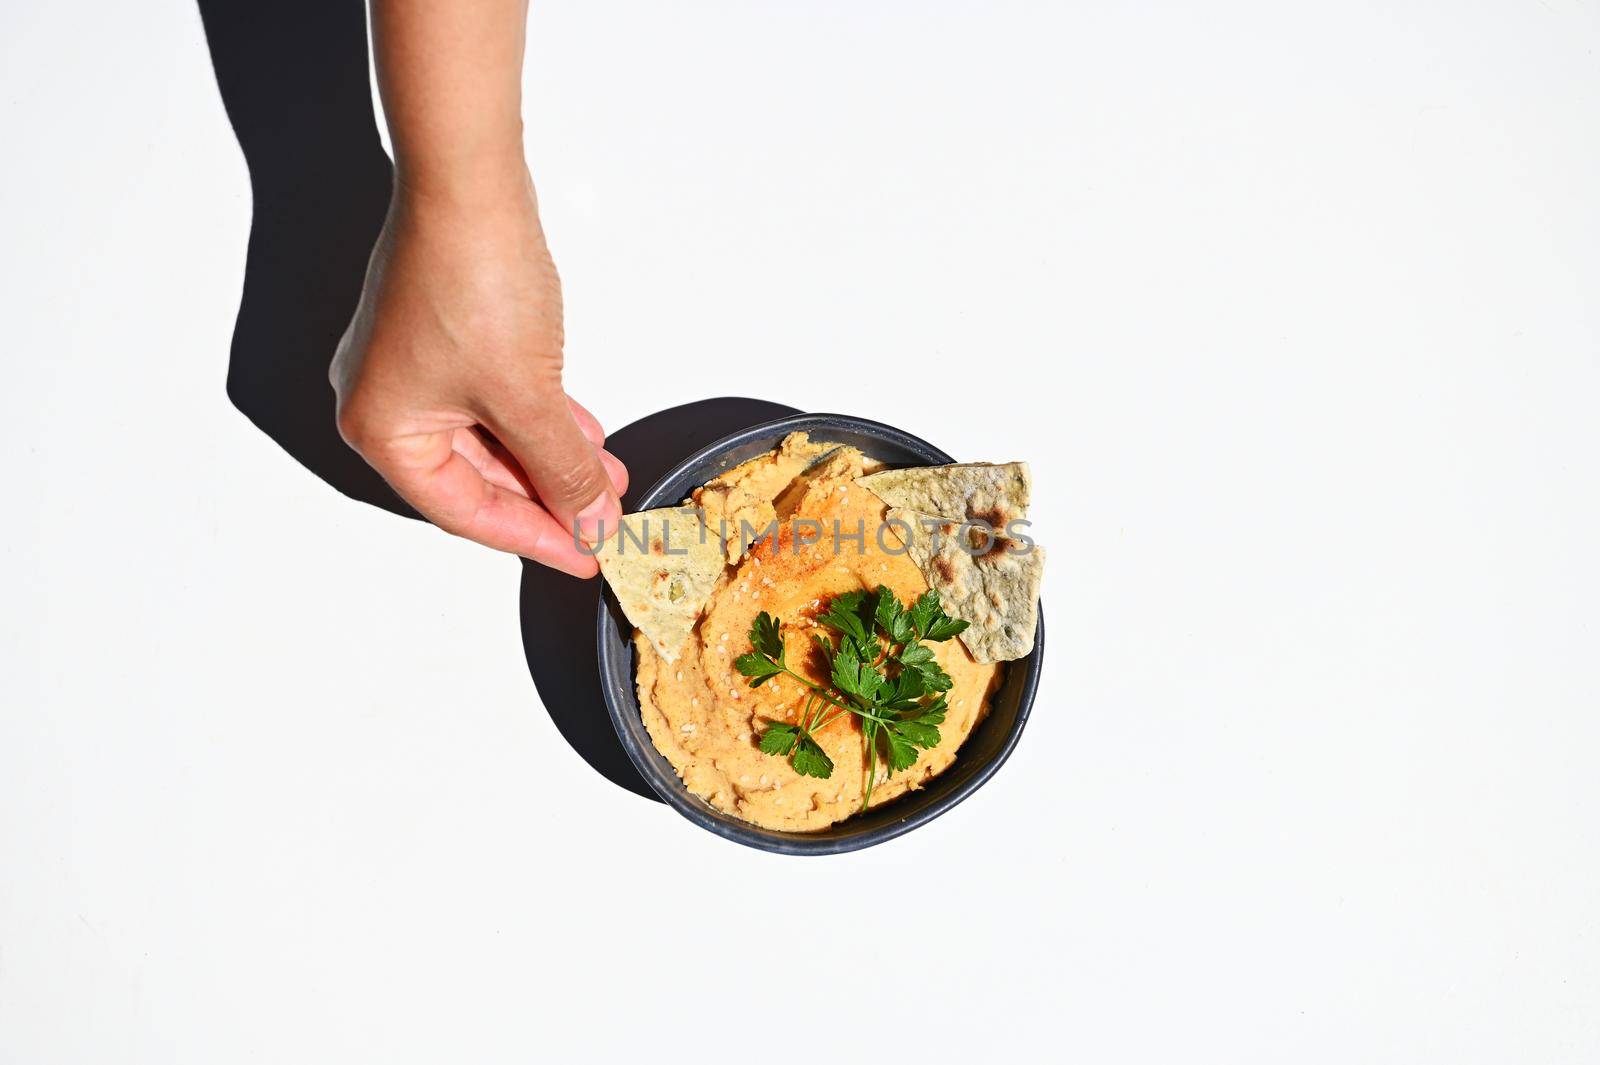 Overhead view of a hand, dipping pita bread into a creamy consistency vegan dish - oriental hummus with parsley in blue ceramic bowl, isolated on white background